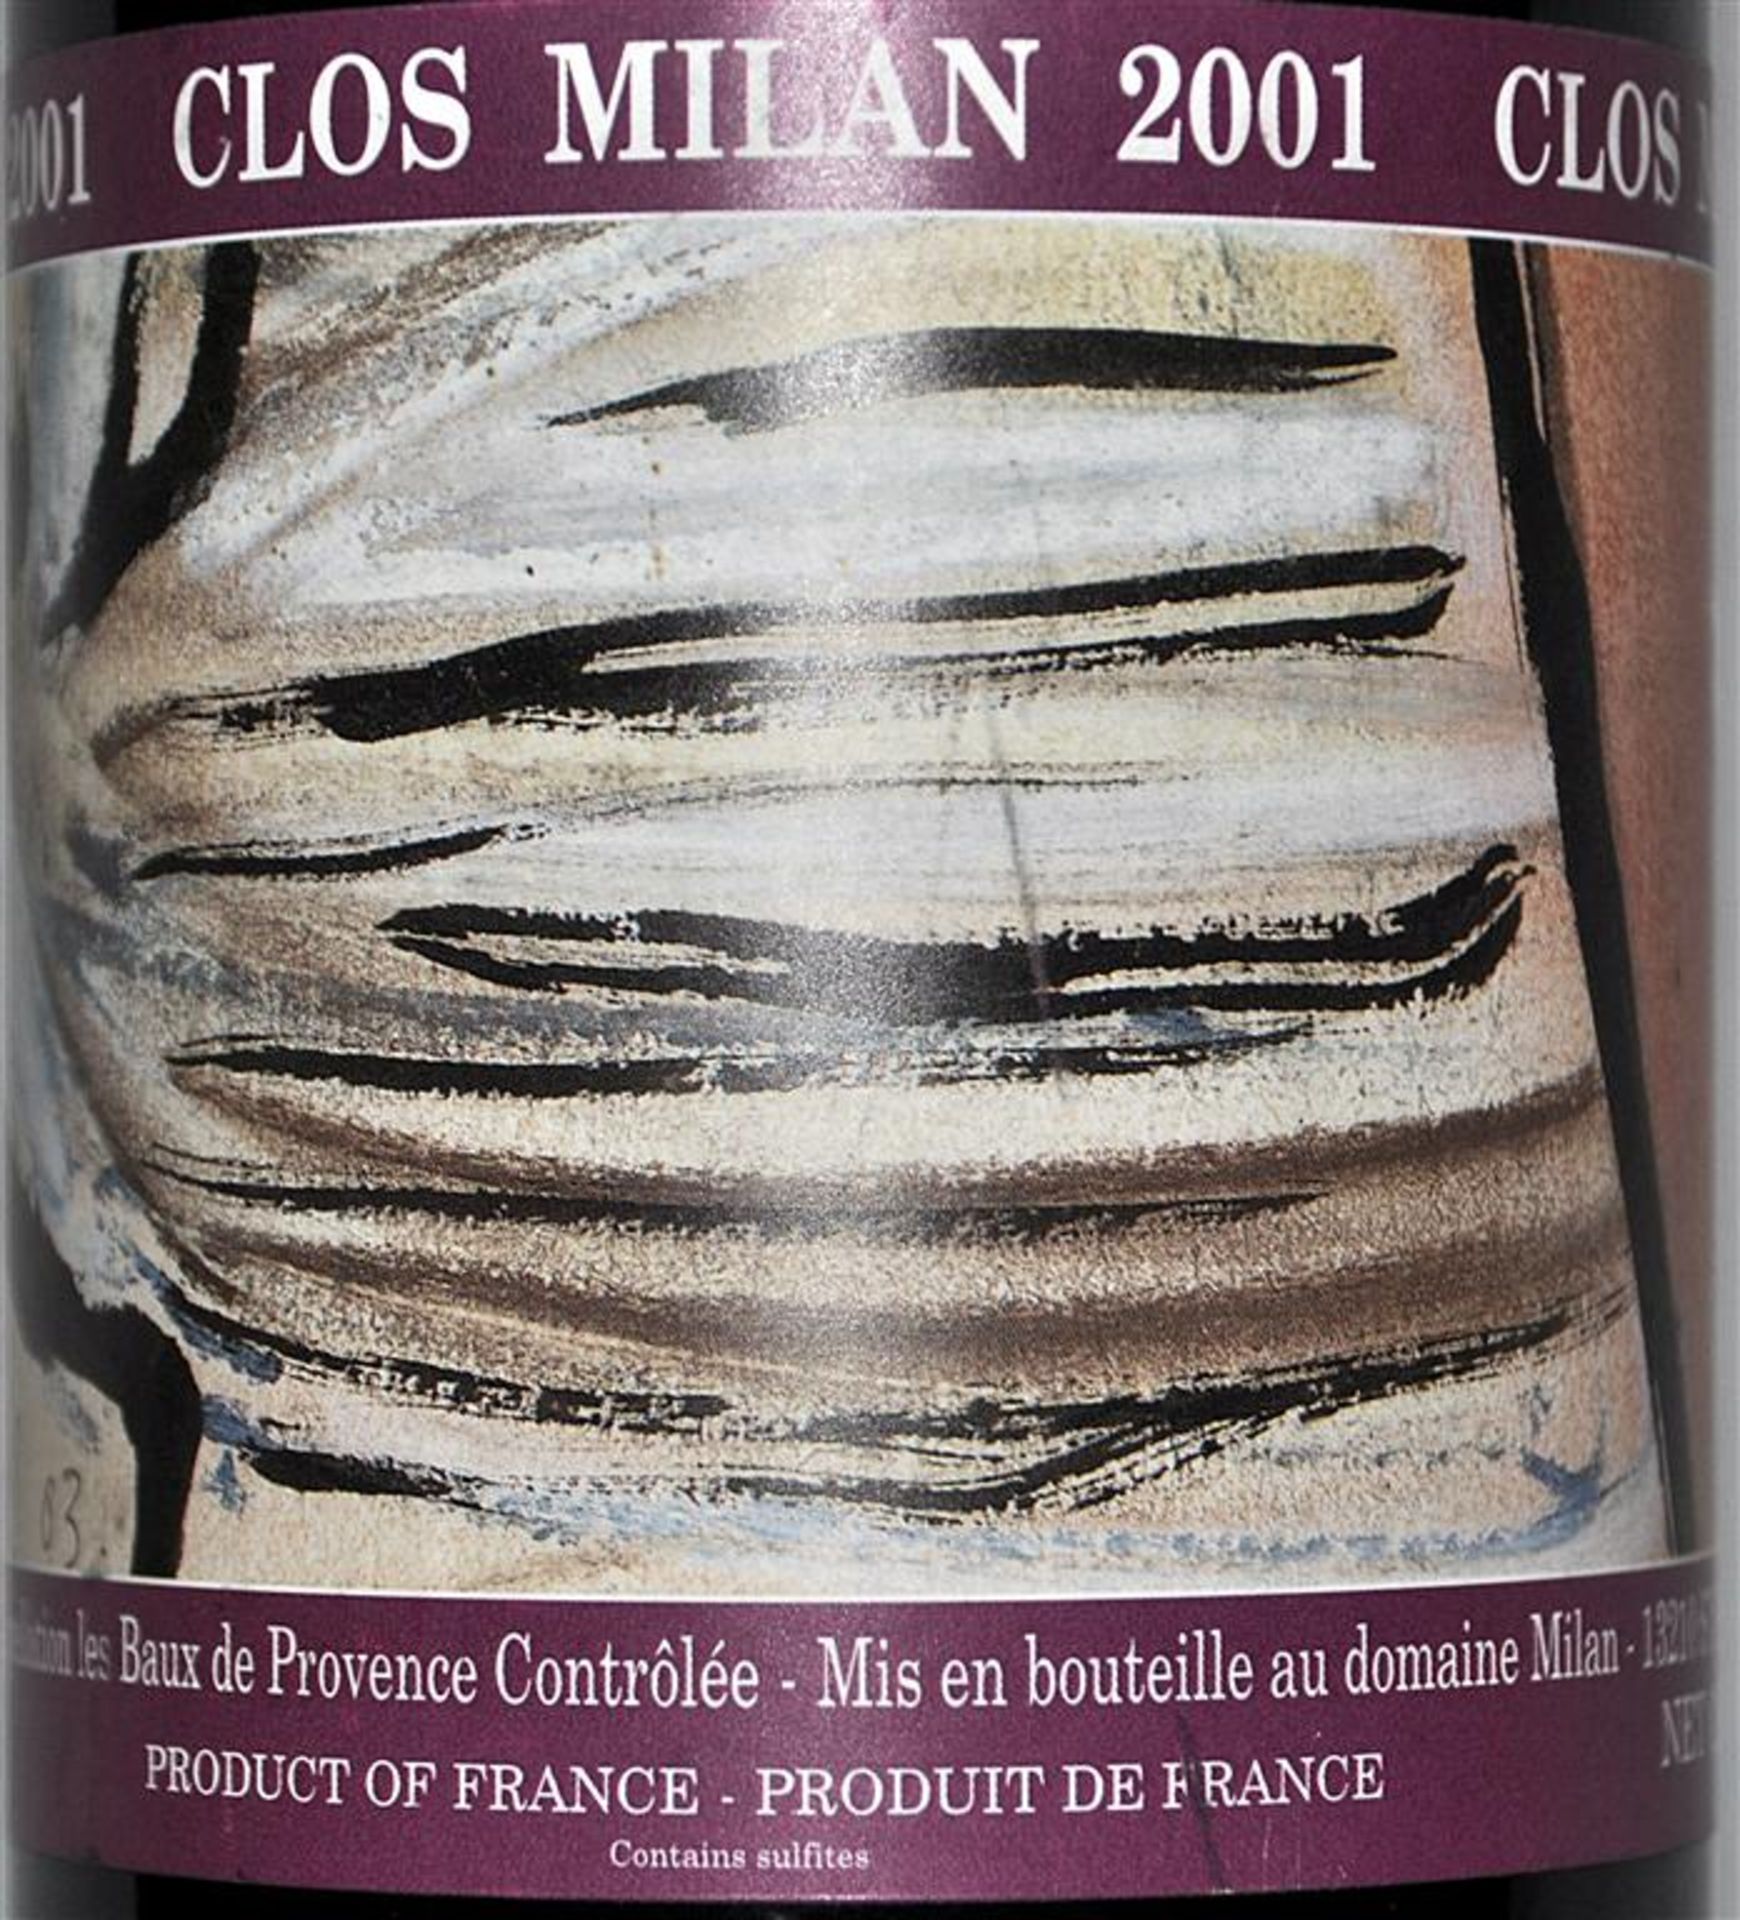 1 x Clos Milan 2001 Red Wine - 1.5L Magnum Bottle - 150cl - Product of France - Volume 14% - Ref - Image 2 of 3